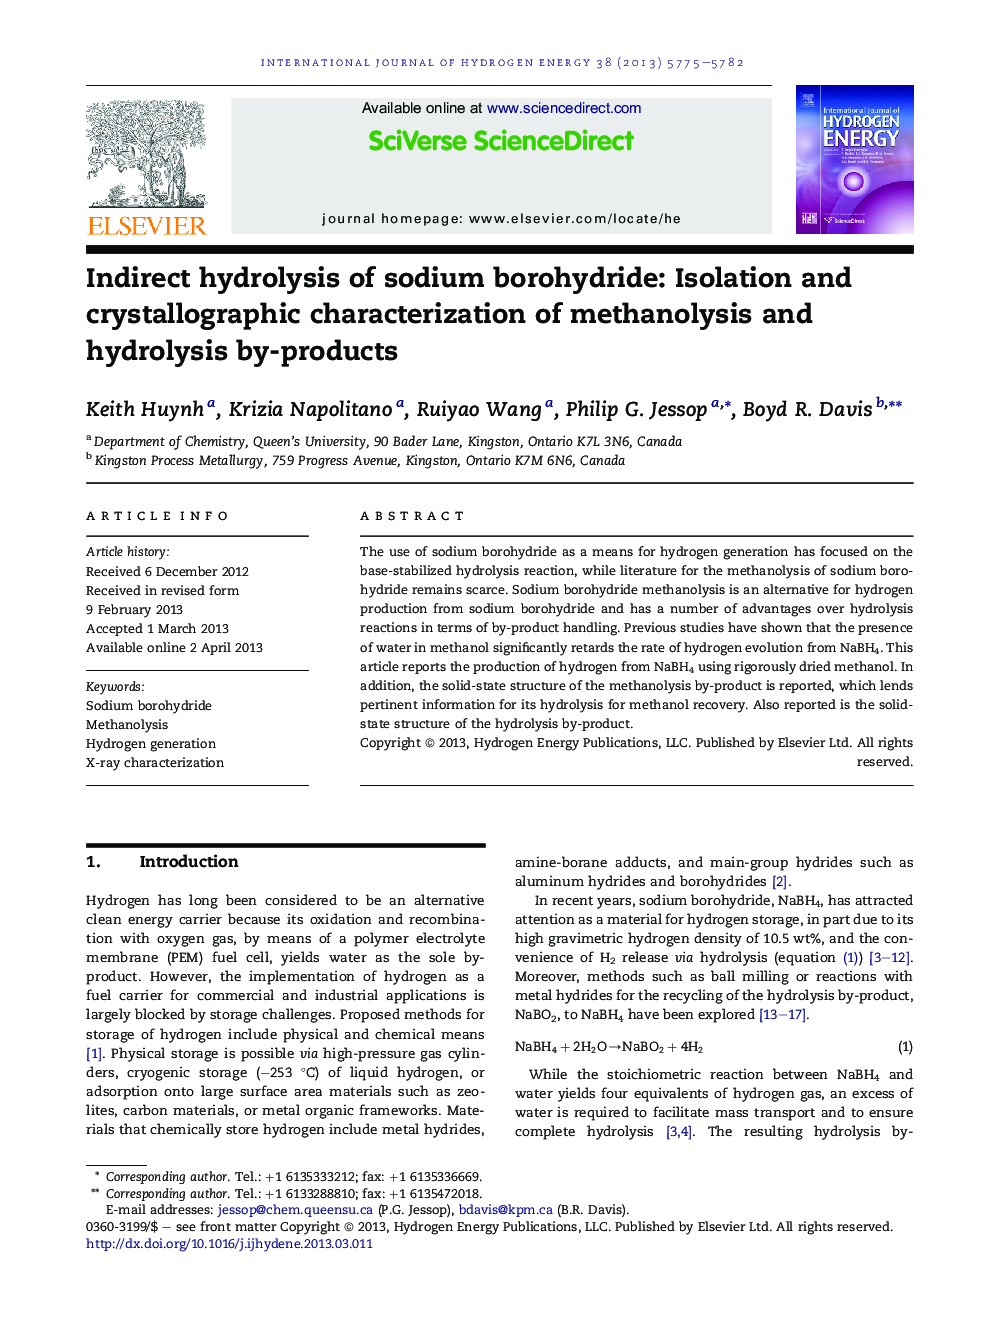 Indirect hydrolysis of sodium borohydride: Isolation and crystallographic characterization of methanolysis and hydrolysis by-products